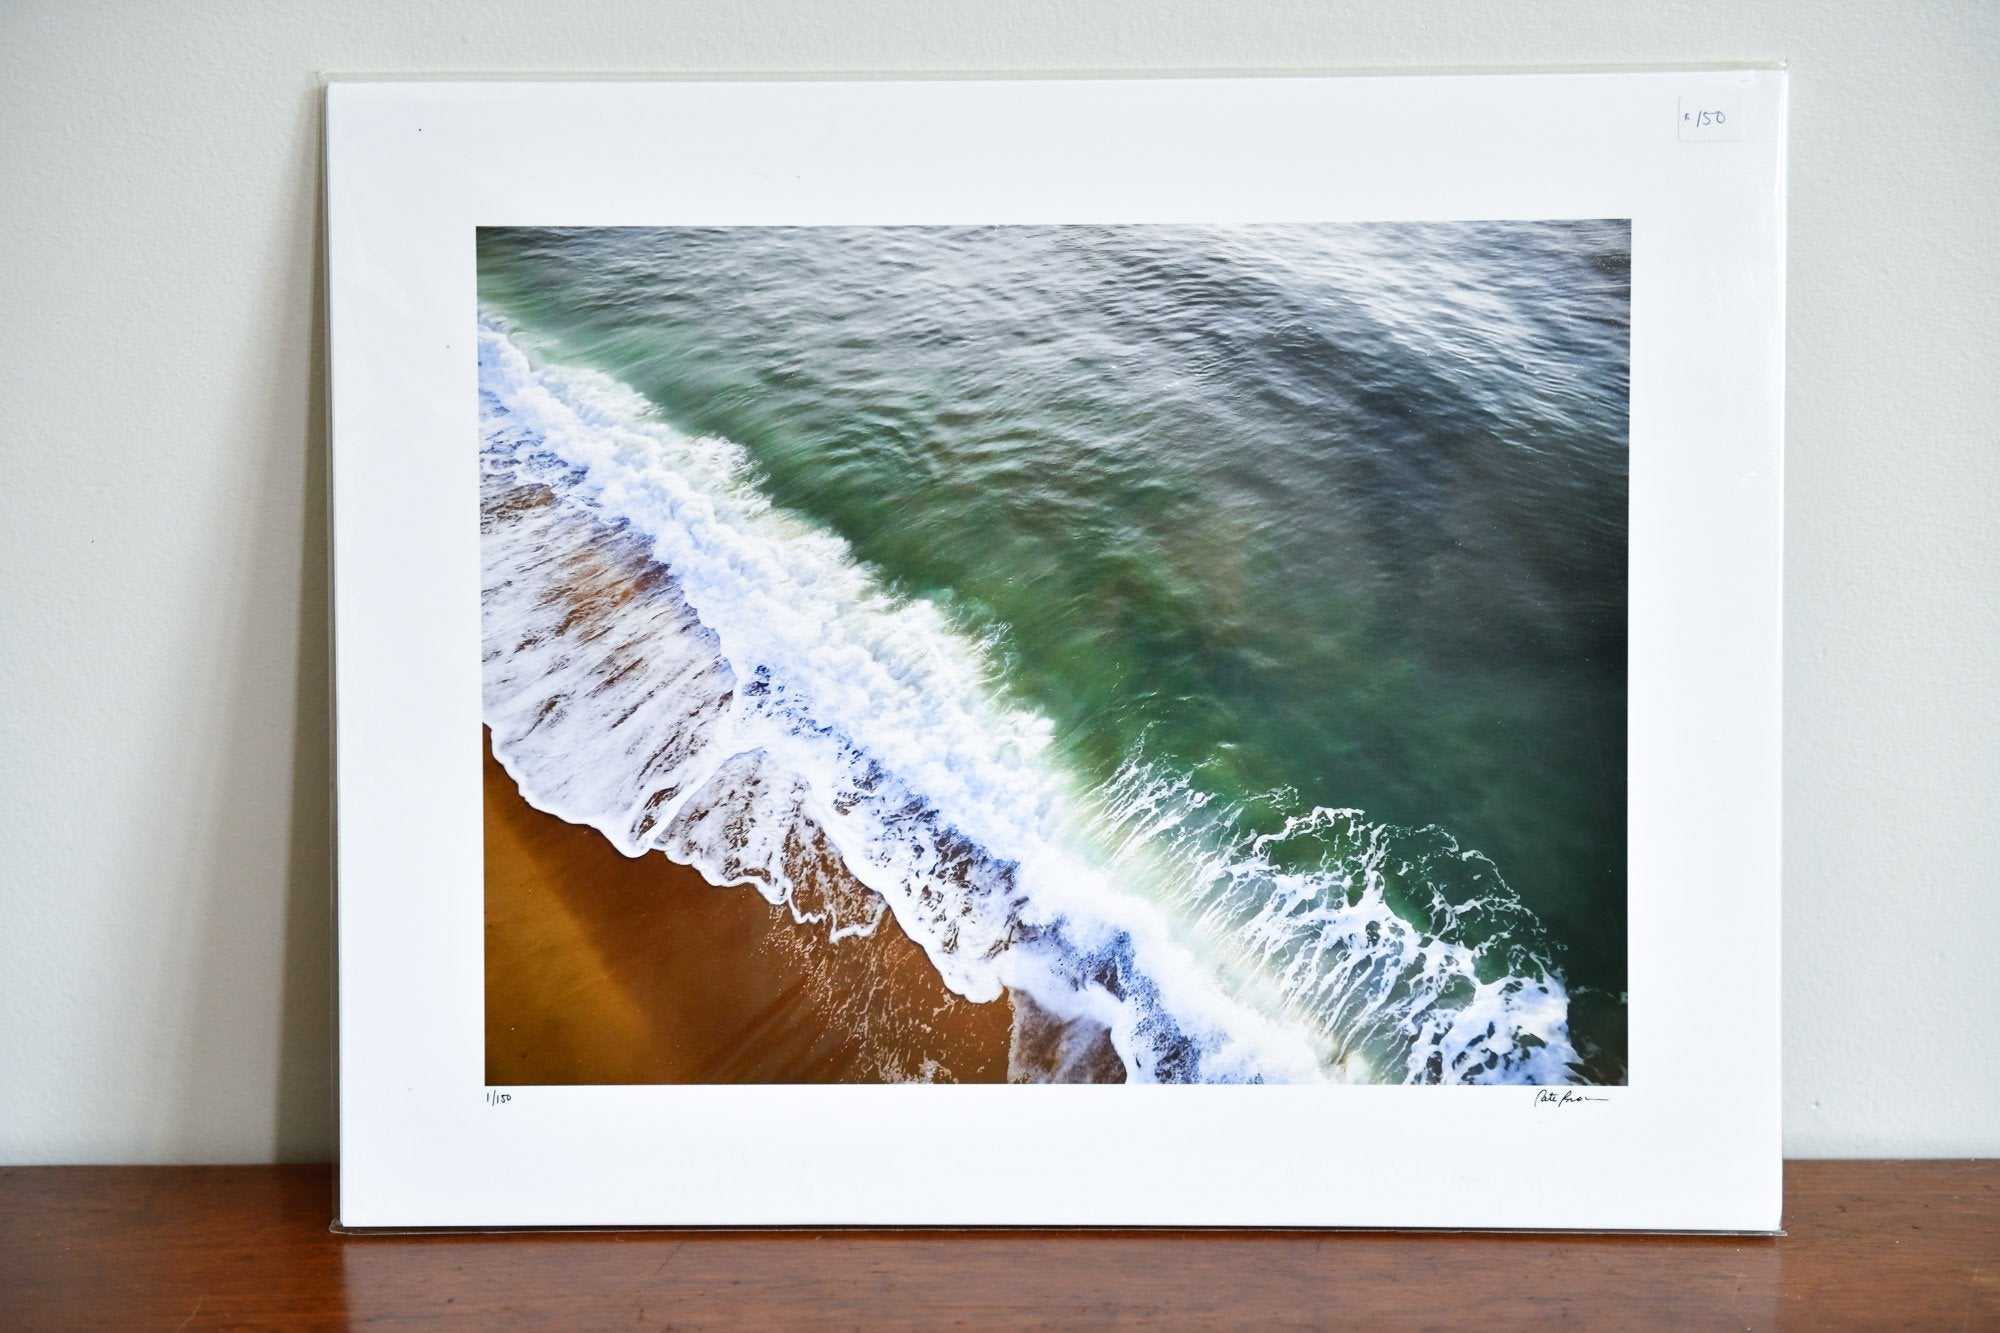 Cate Brown Photo East Beach Aerial #12 // Fine Art Print 12x16" // Limited Edition 1 of 150 Available Inventory Ocean Fine Art